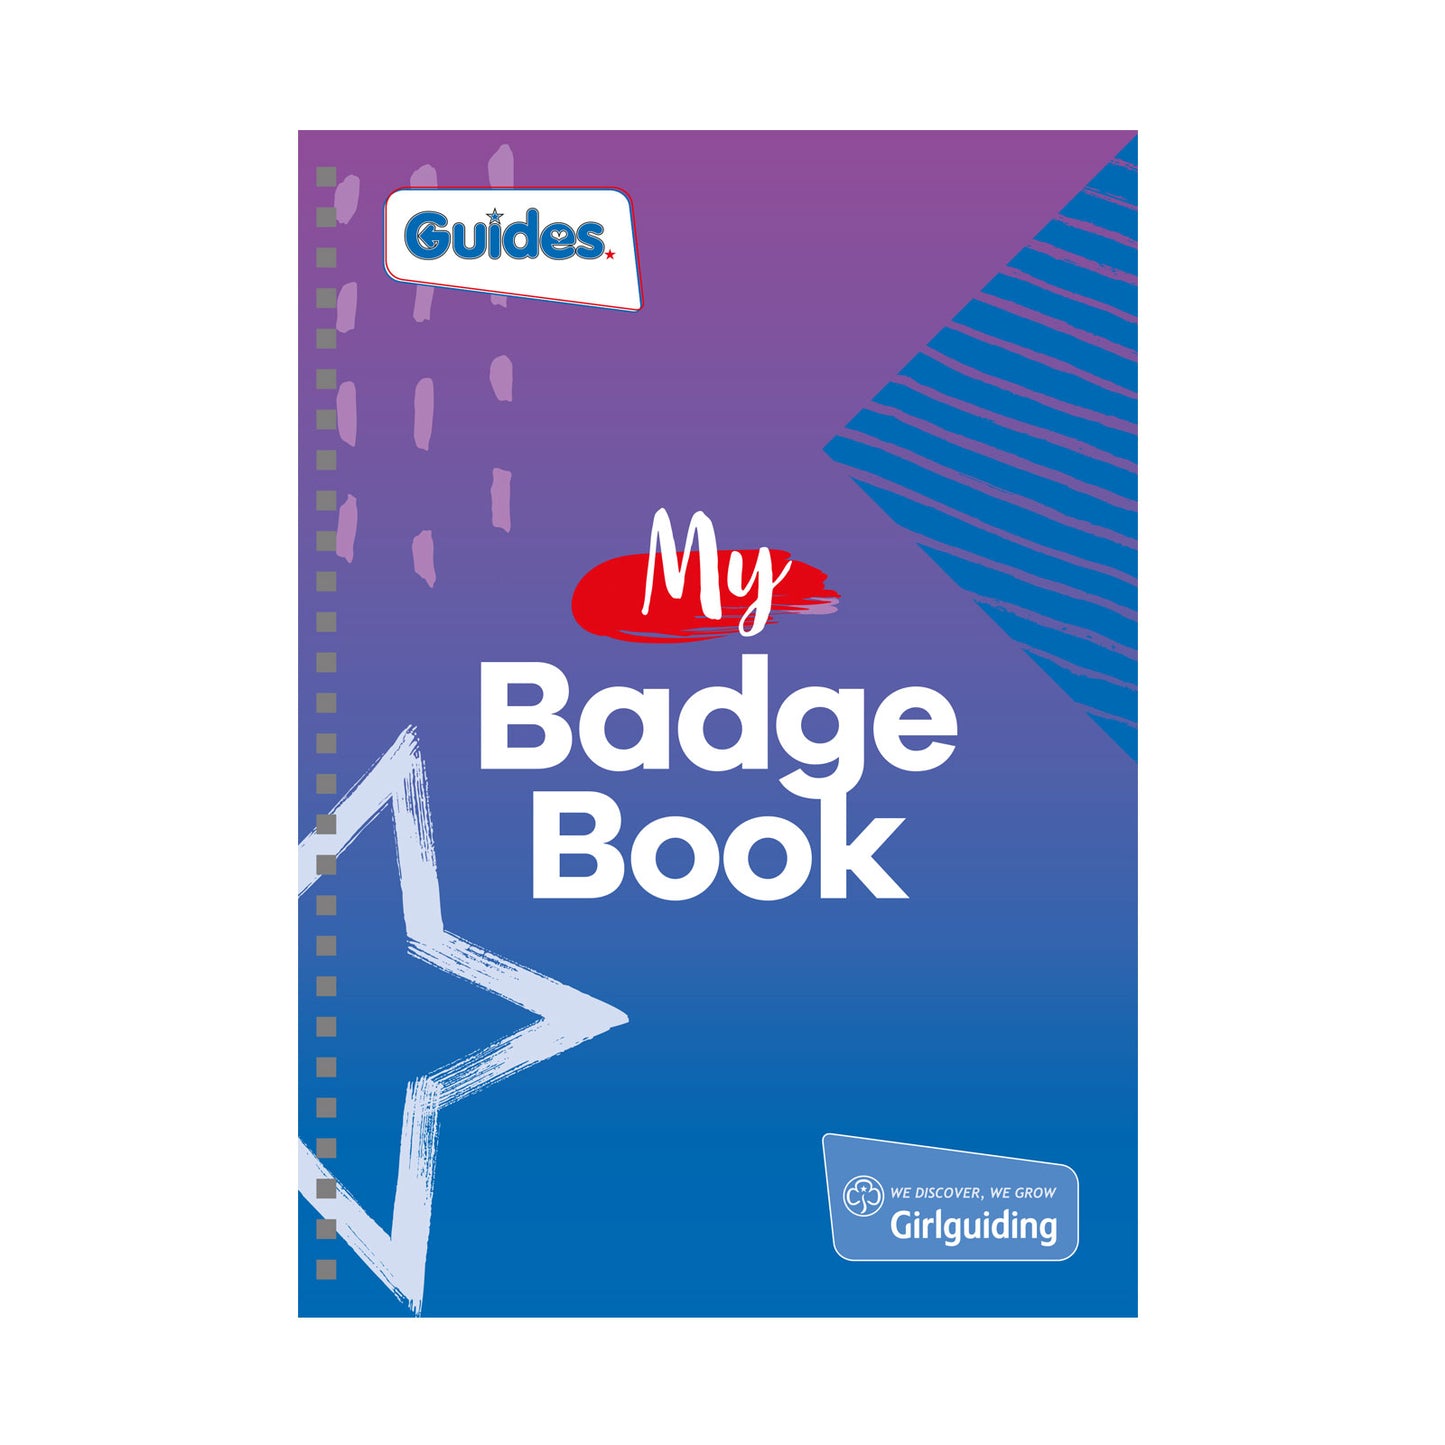 Guides - My Badge Book